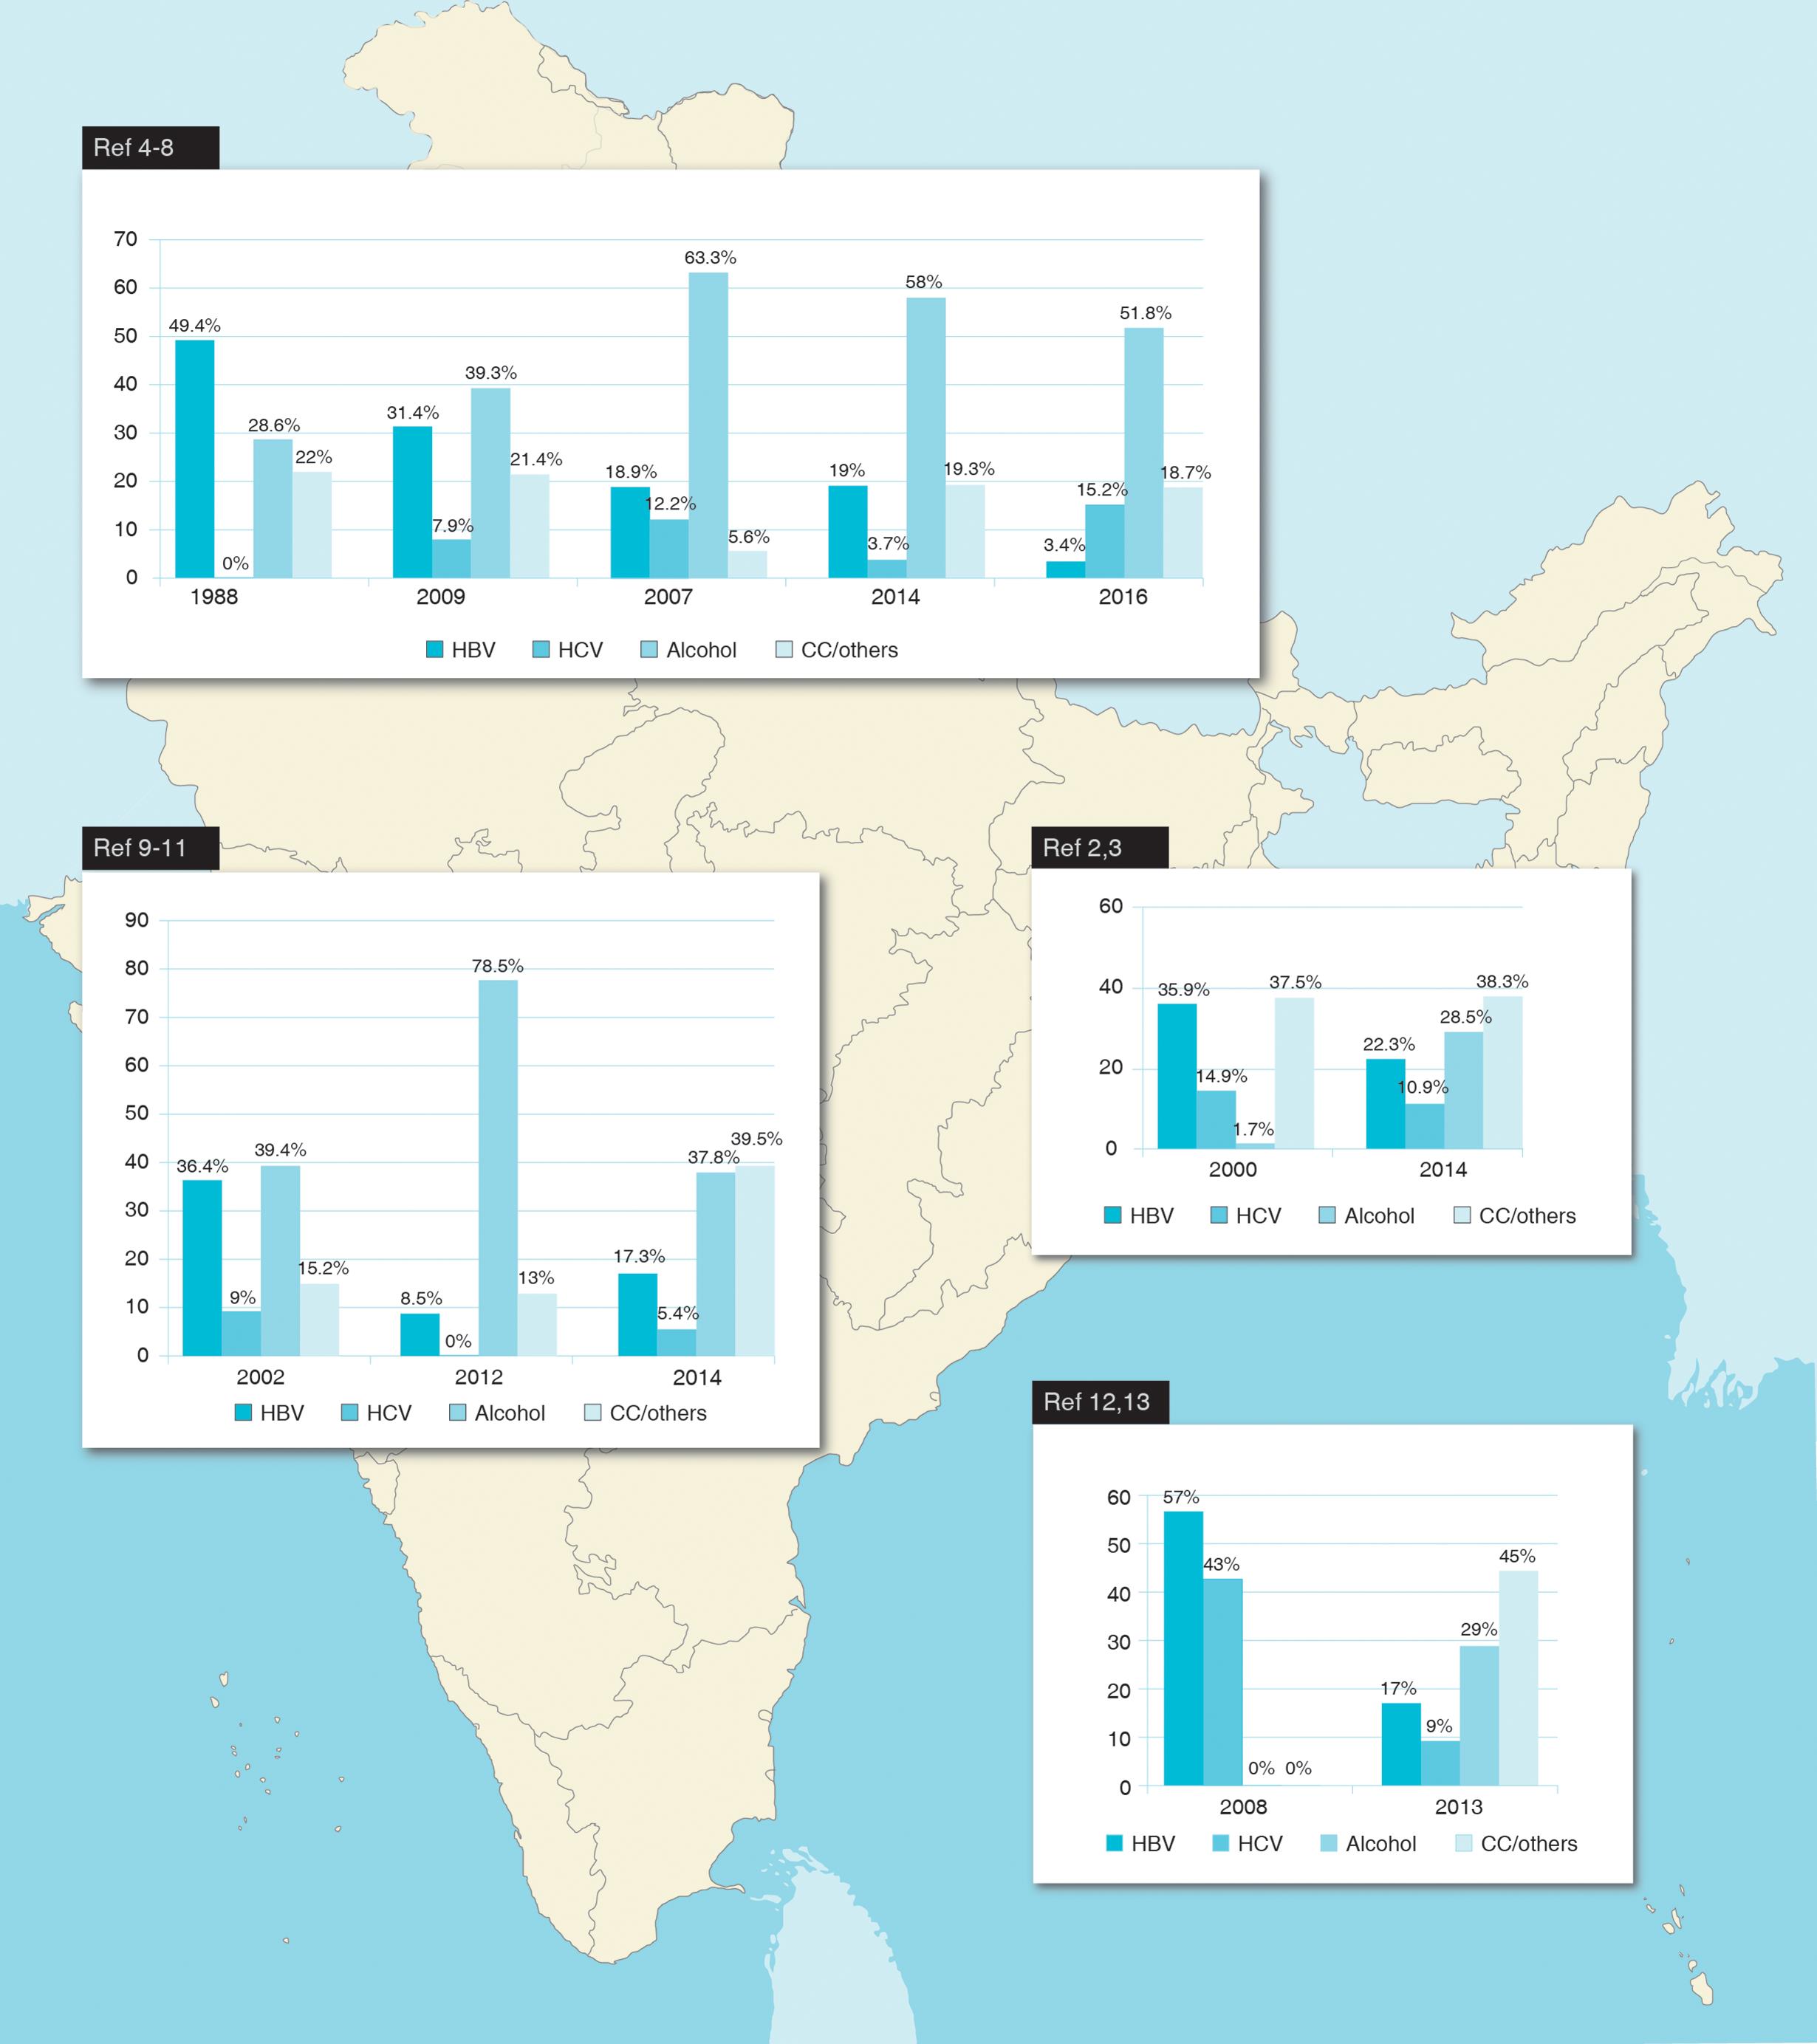 Trends in aetiology of chronic liver disease in north, west, south and east India.